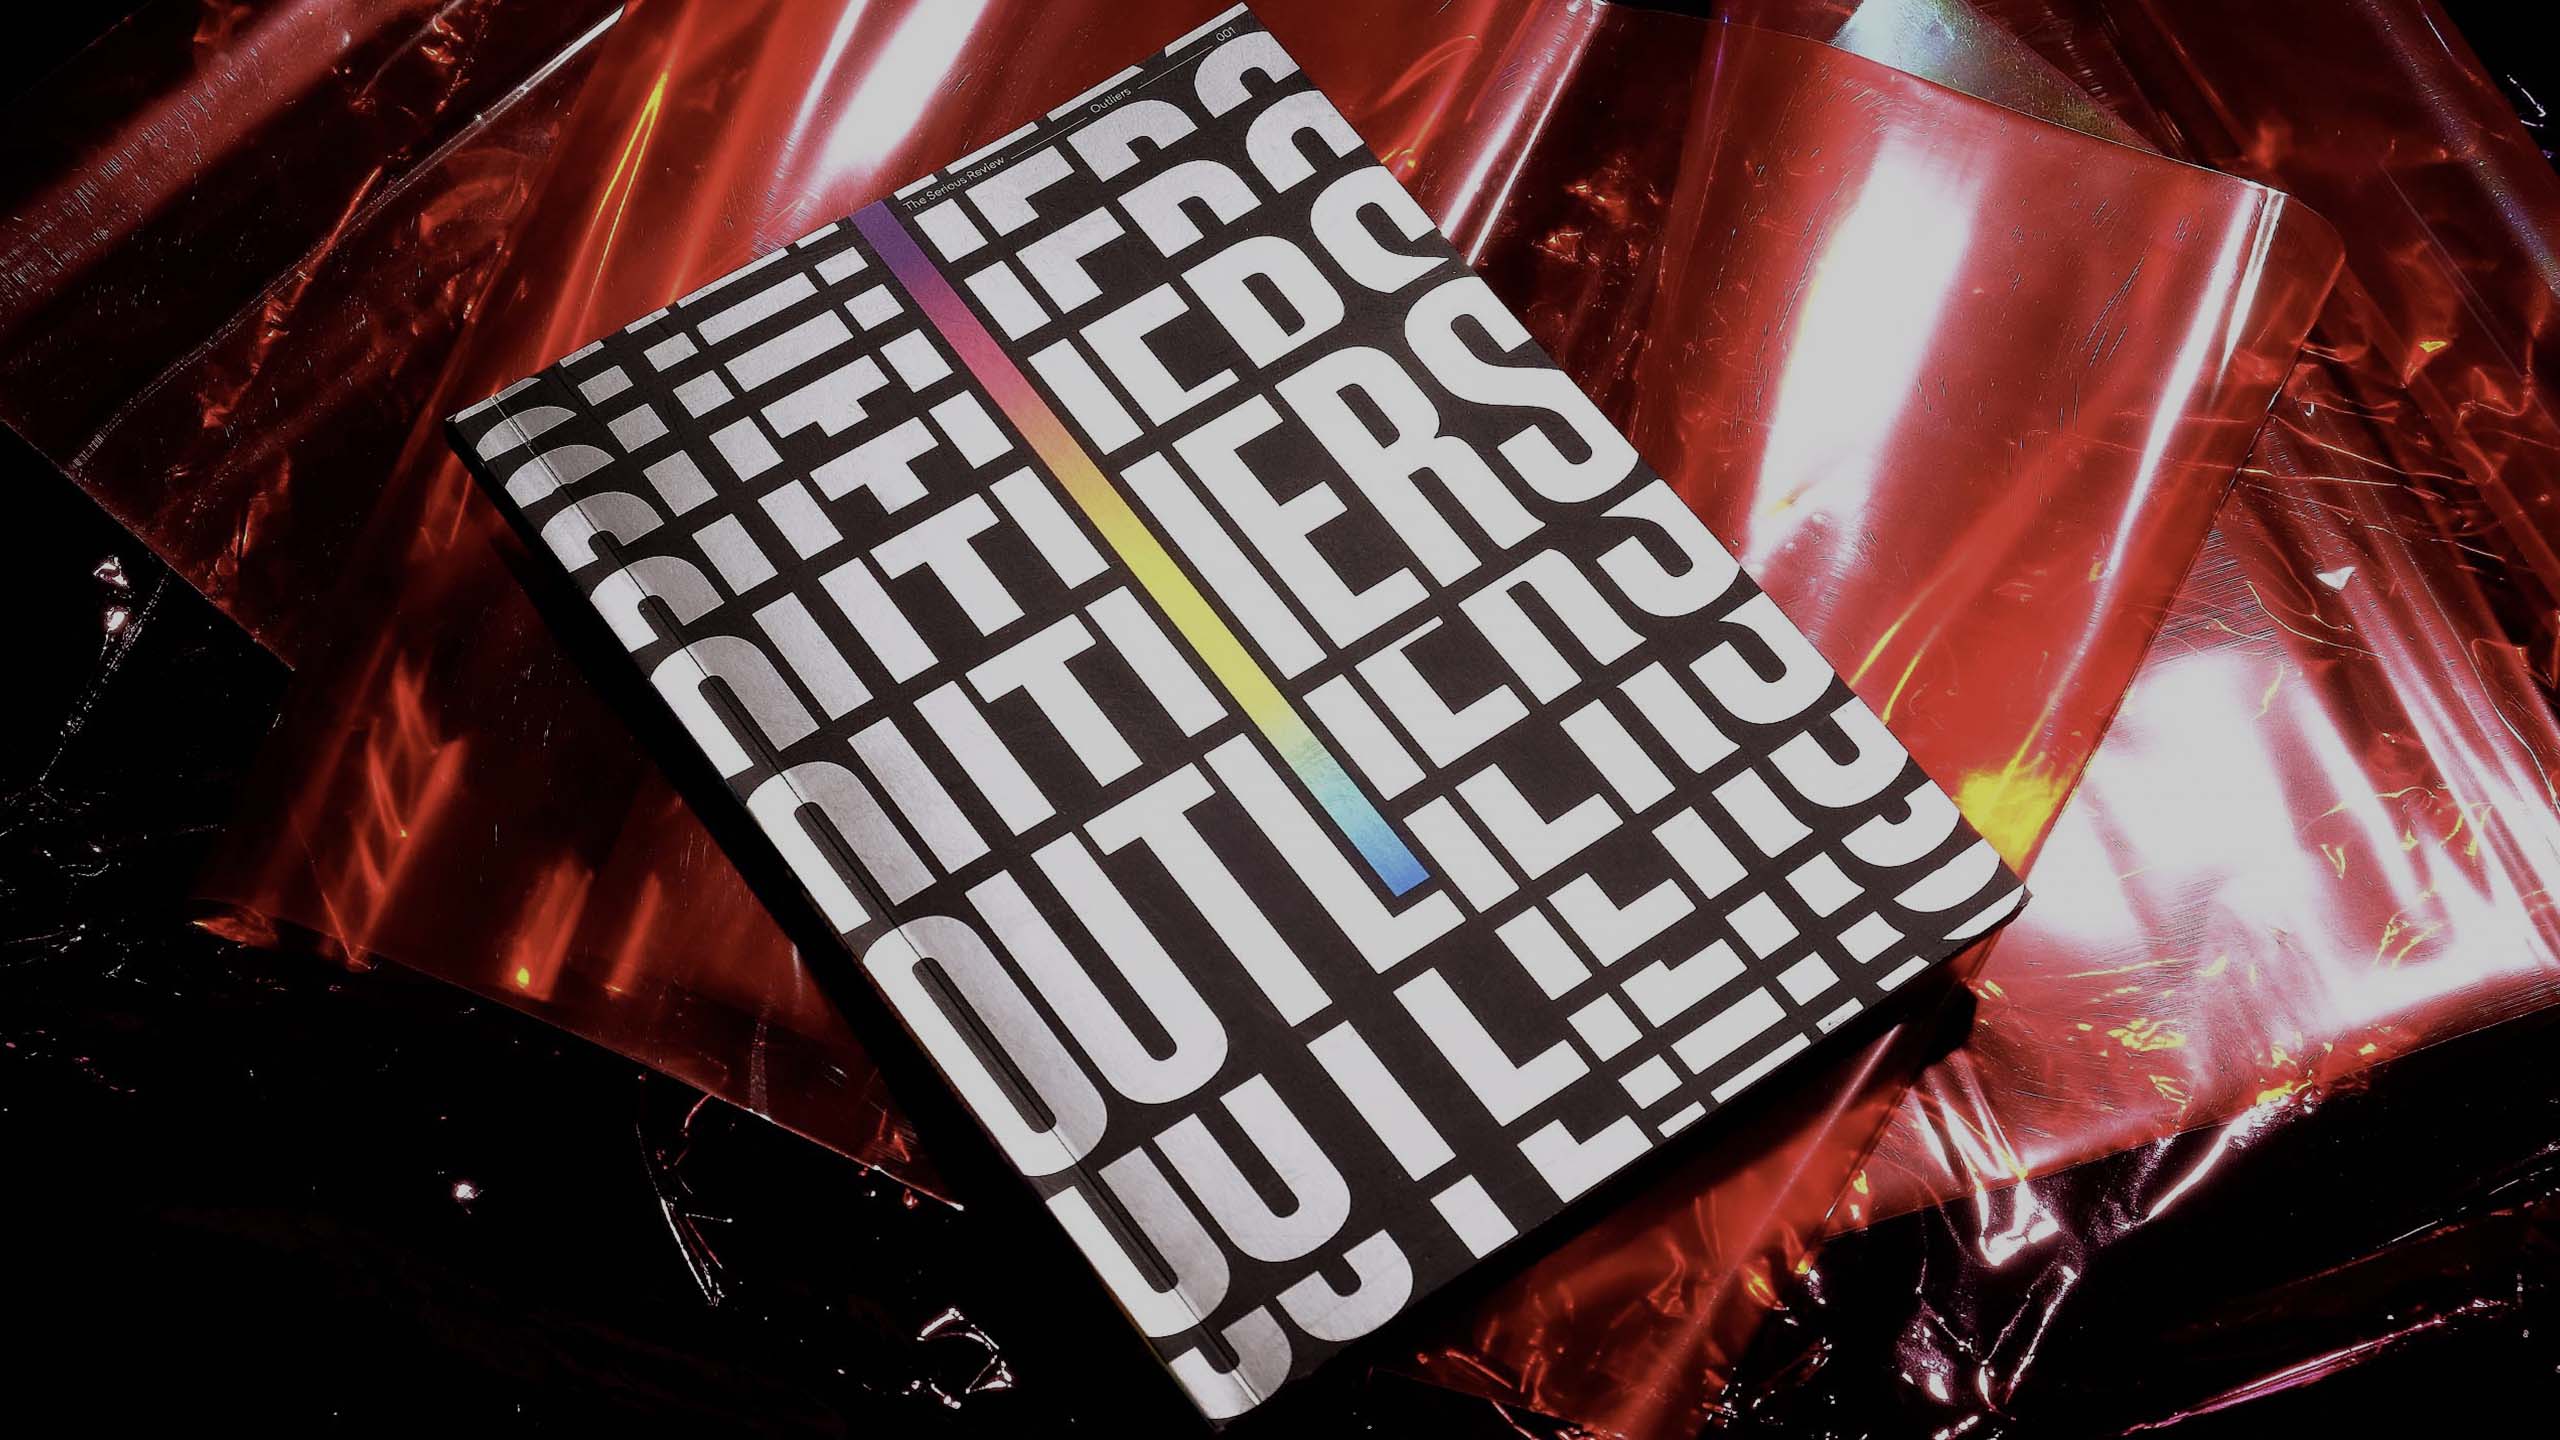 The front cover of Outliers, the first volume of The Serious Review